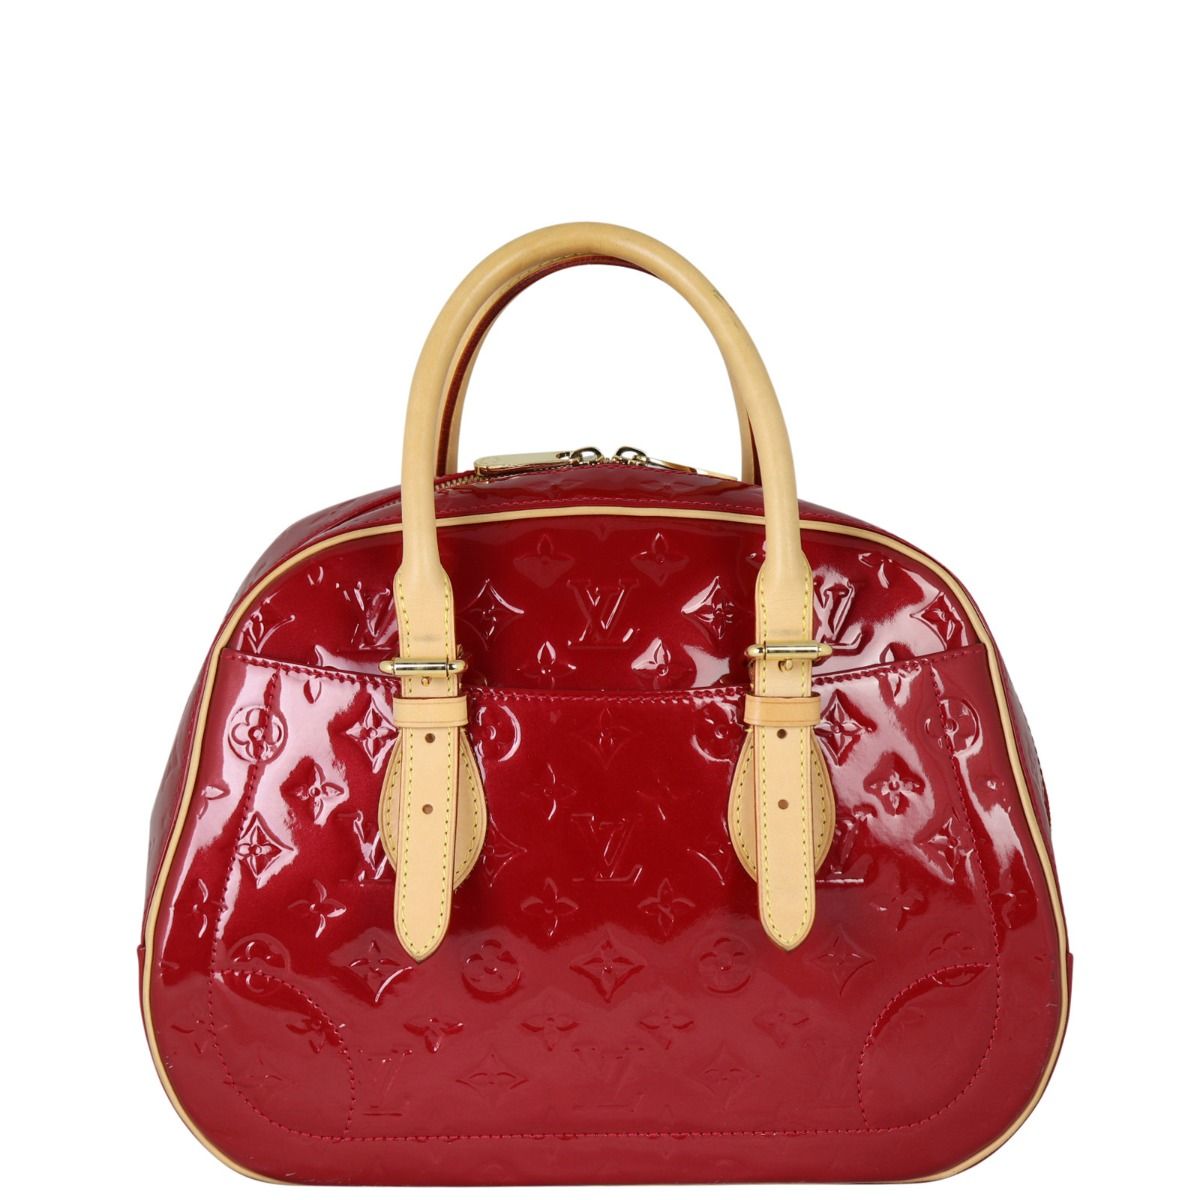 Sell Louis Vuitton Monogram Vernis Summit Drive Tote Bag - Red